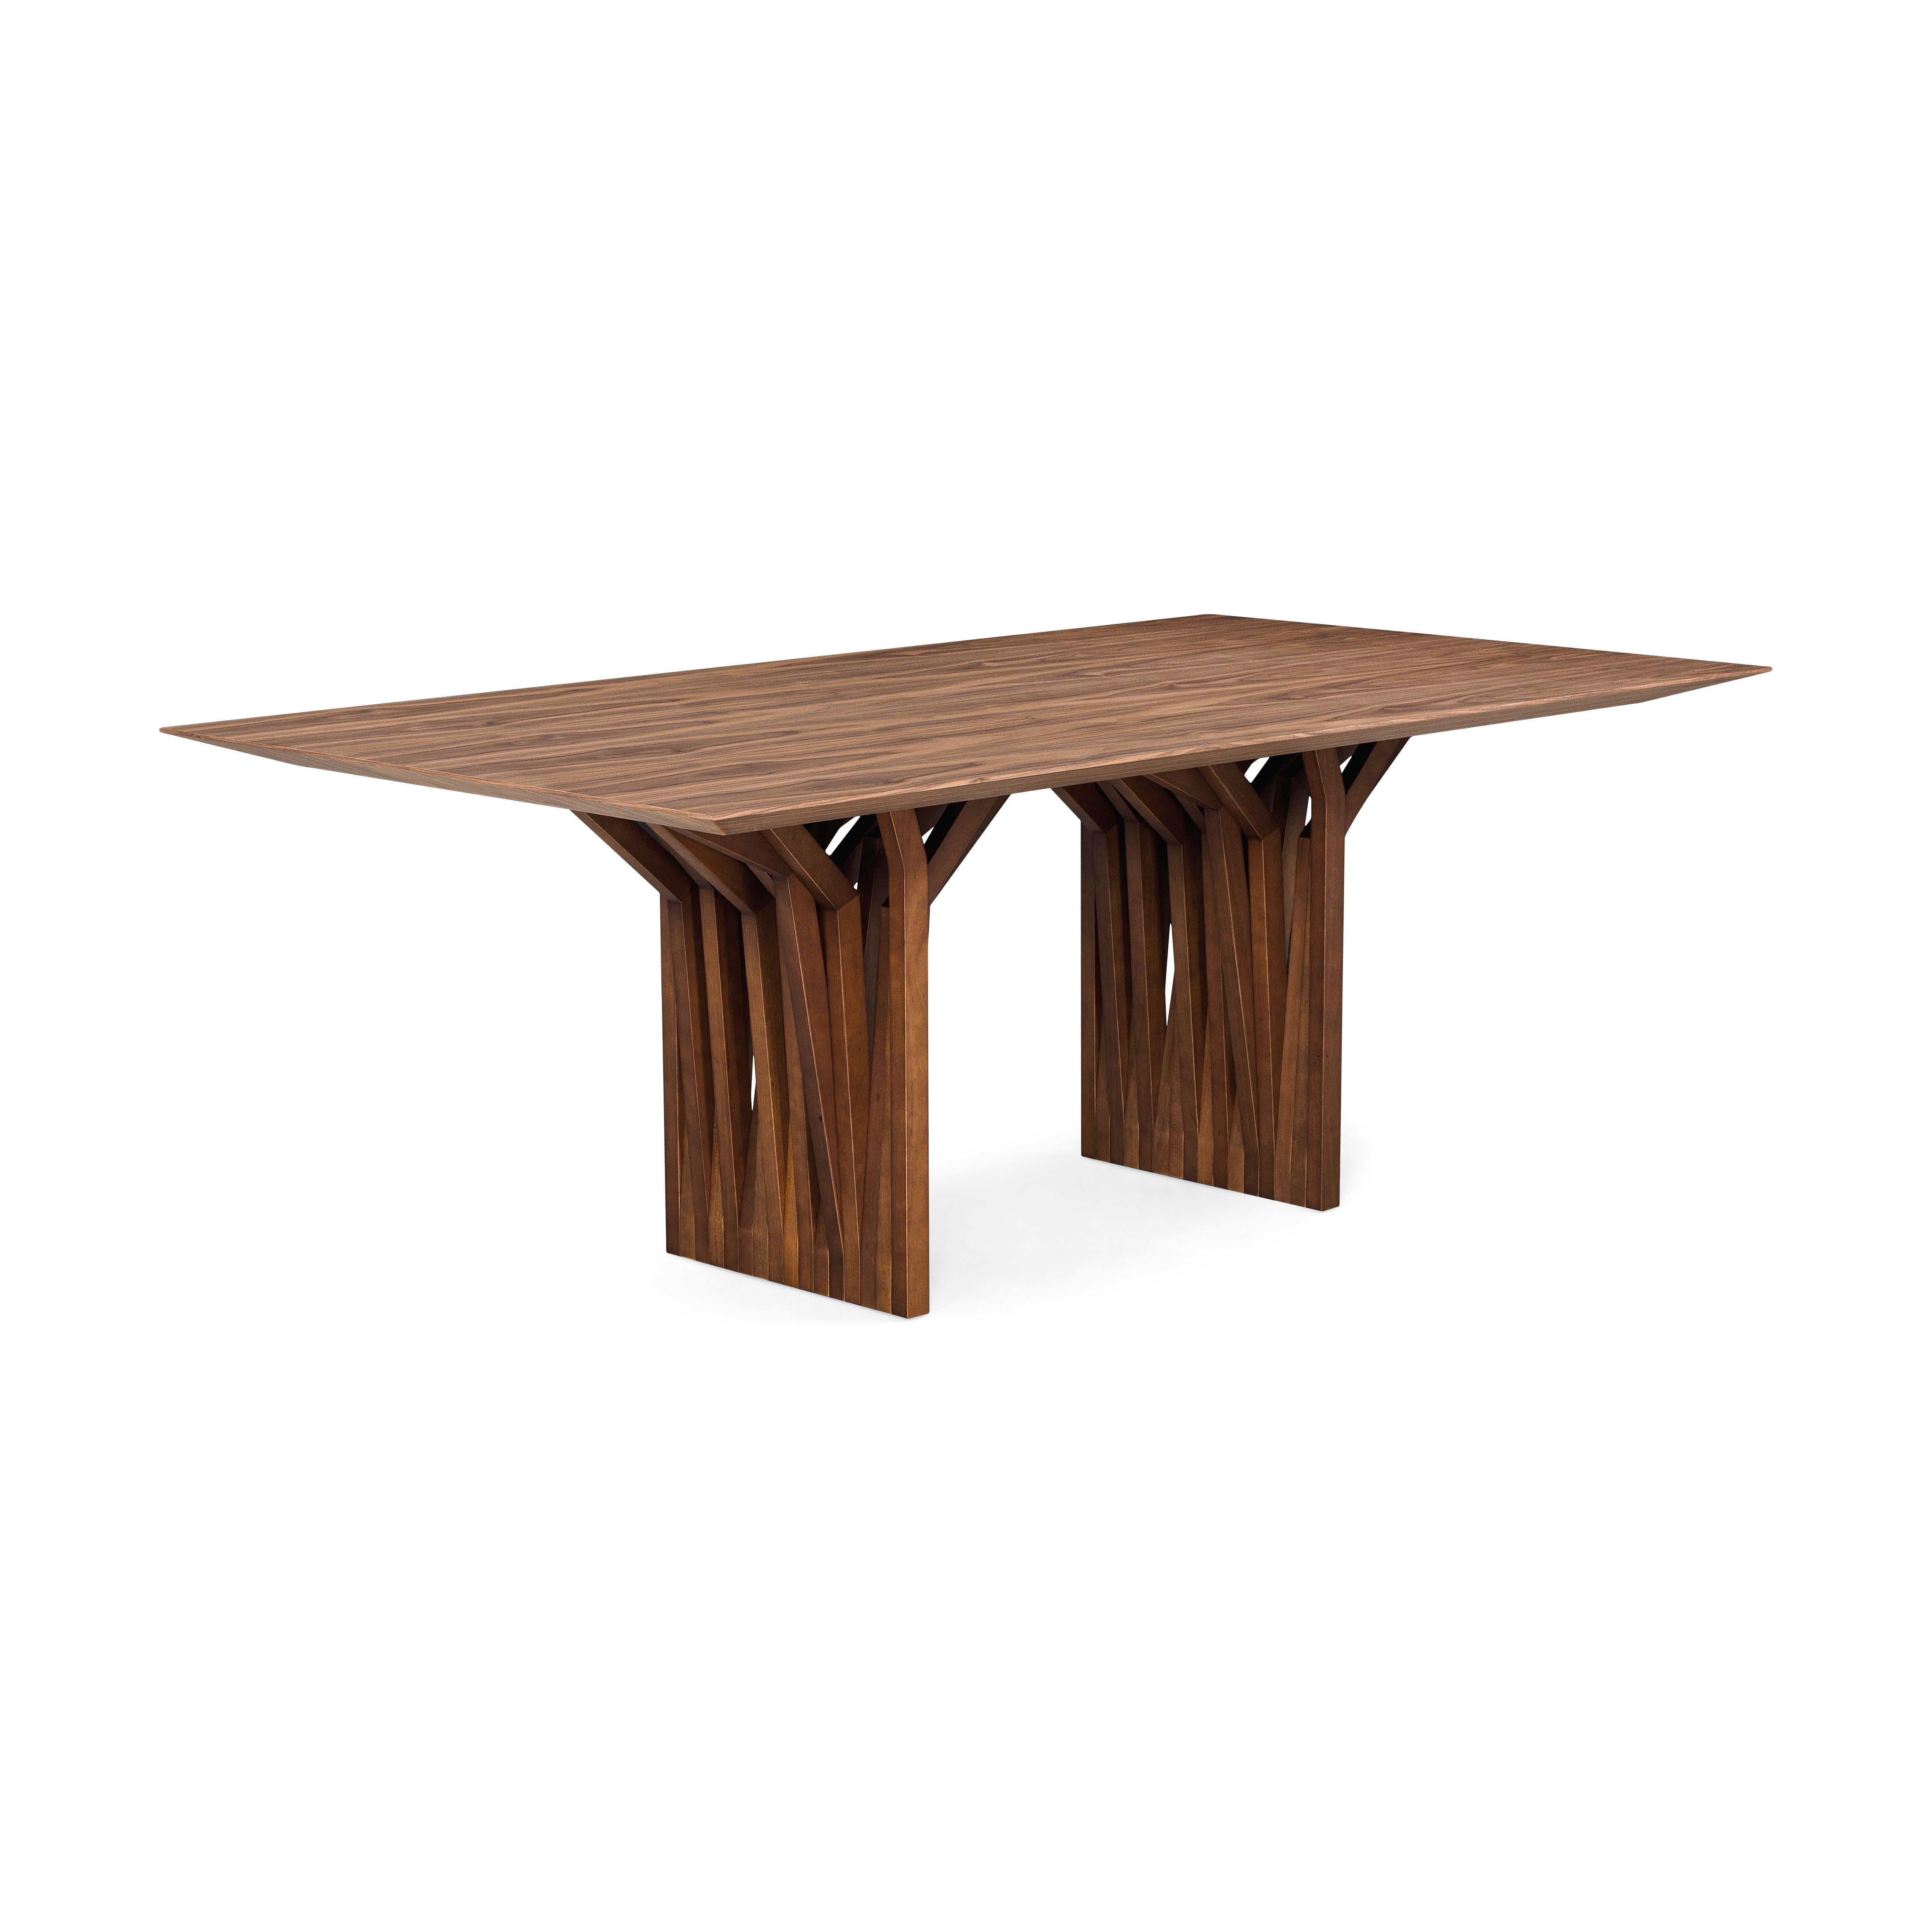 Contemporary Radi Dining Table with a Walnut Wood Veneered Table Top 78'' For Sale